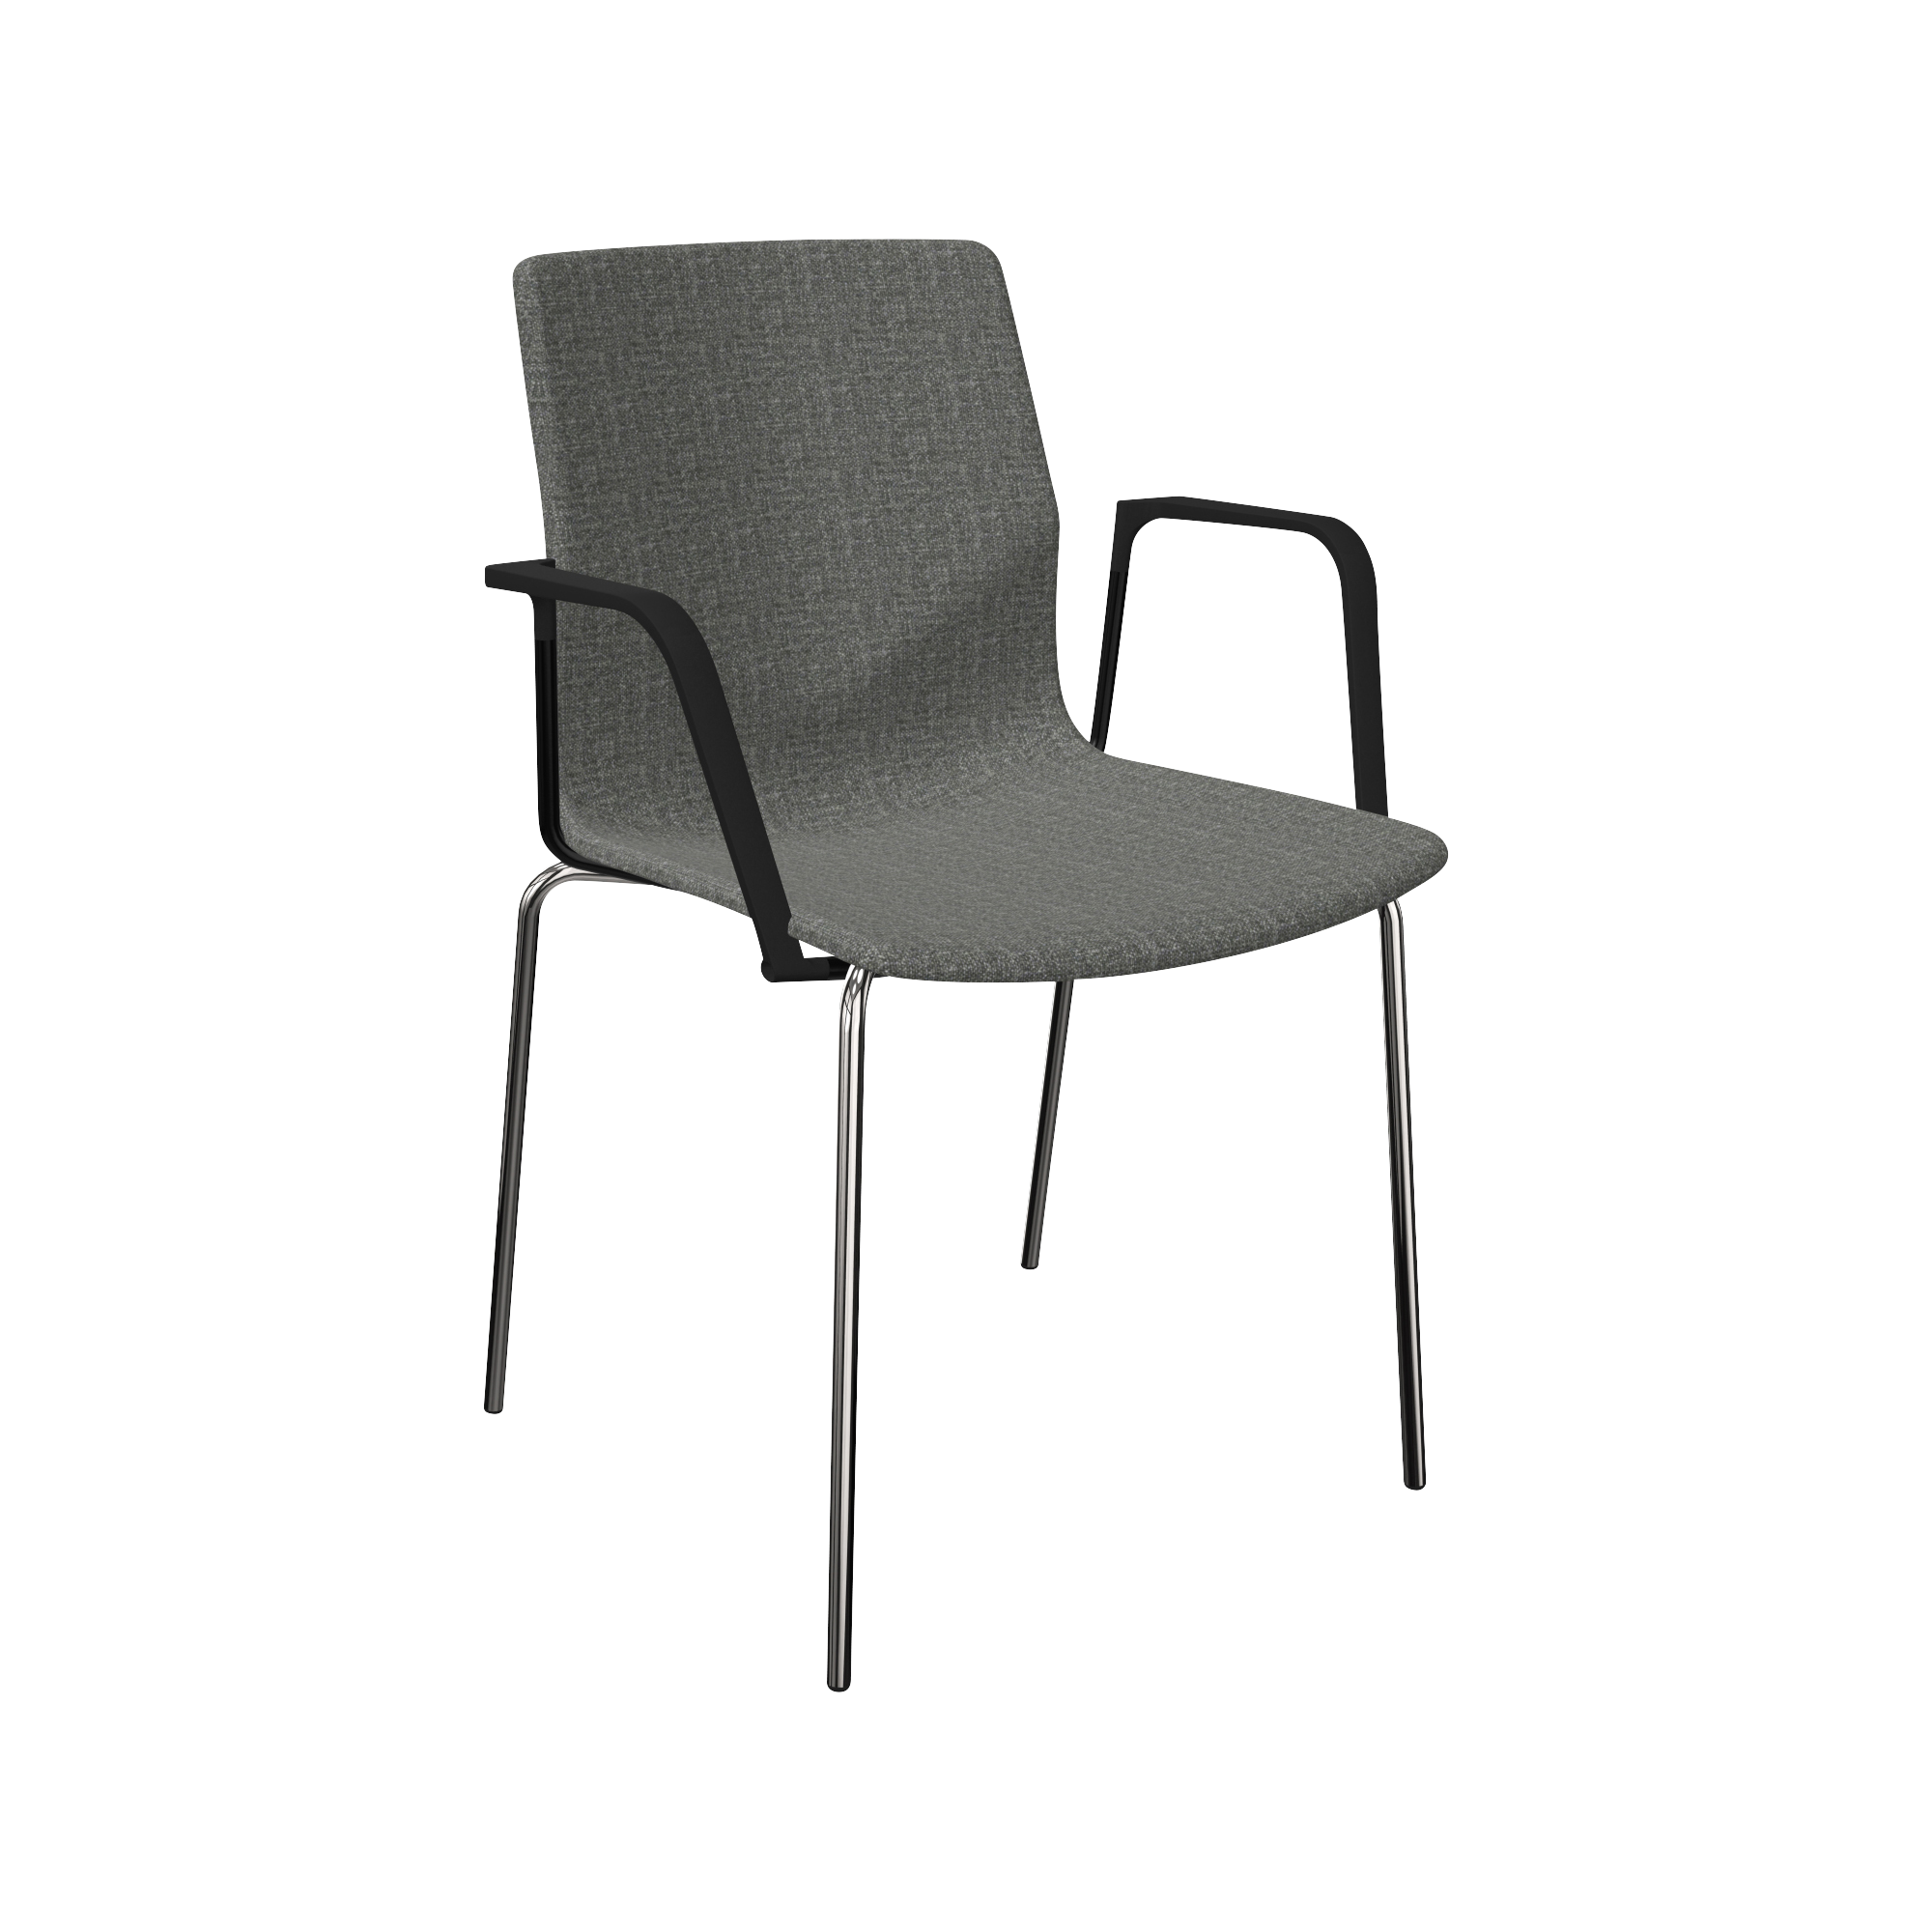 A grey chair with a black frame